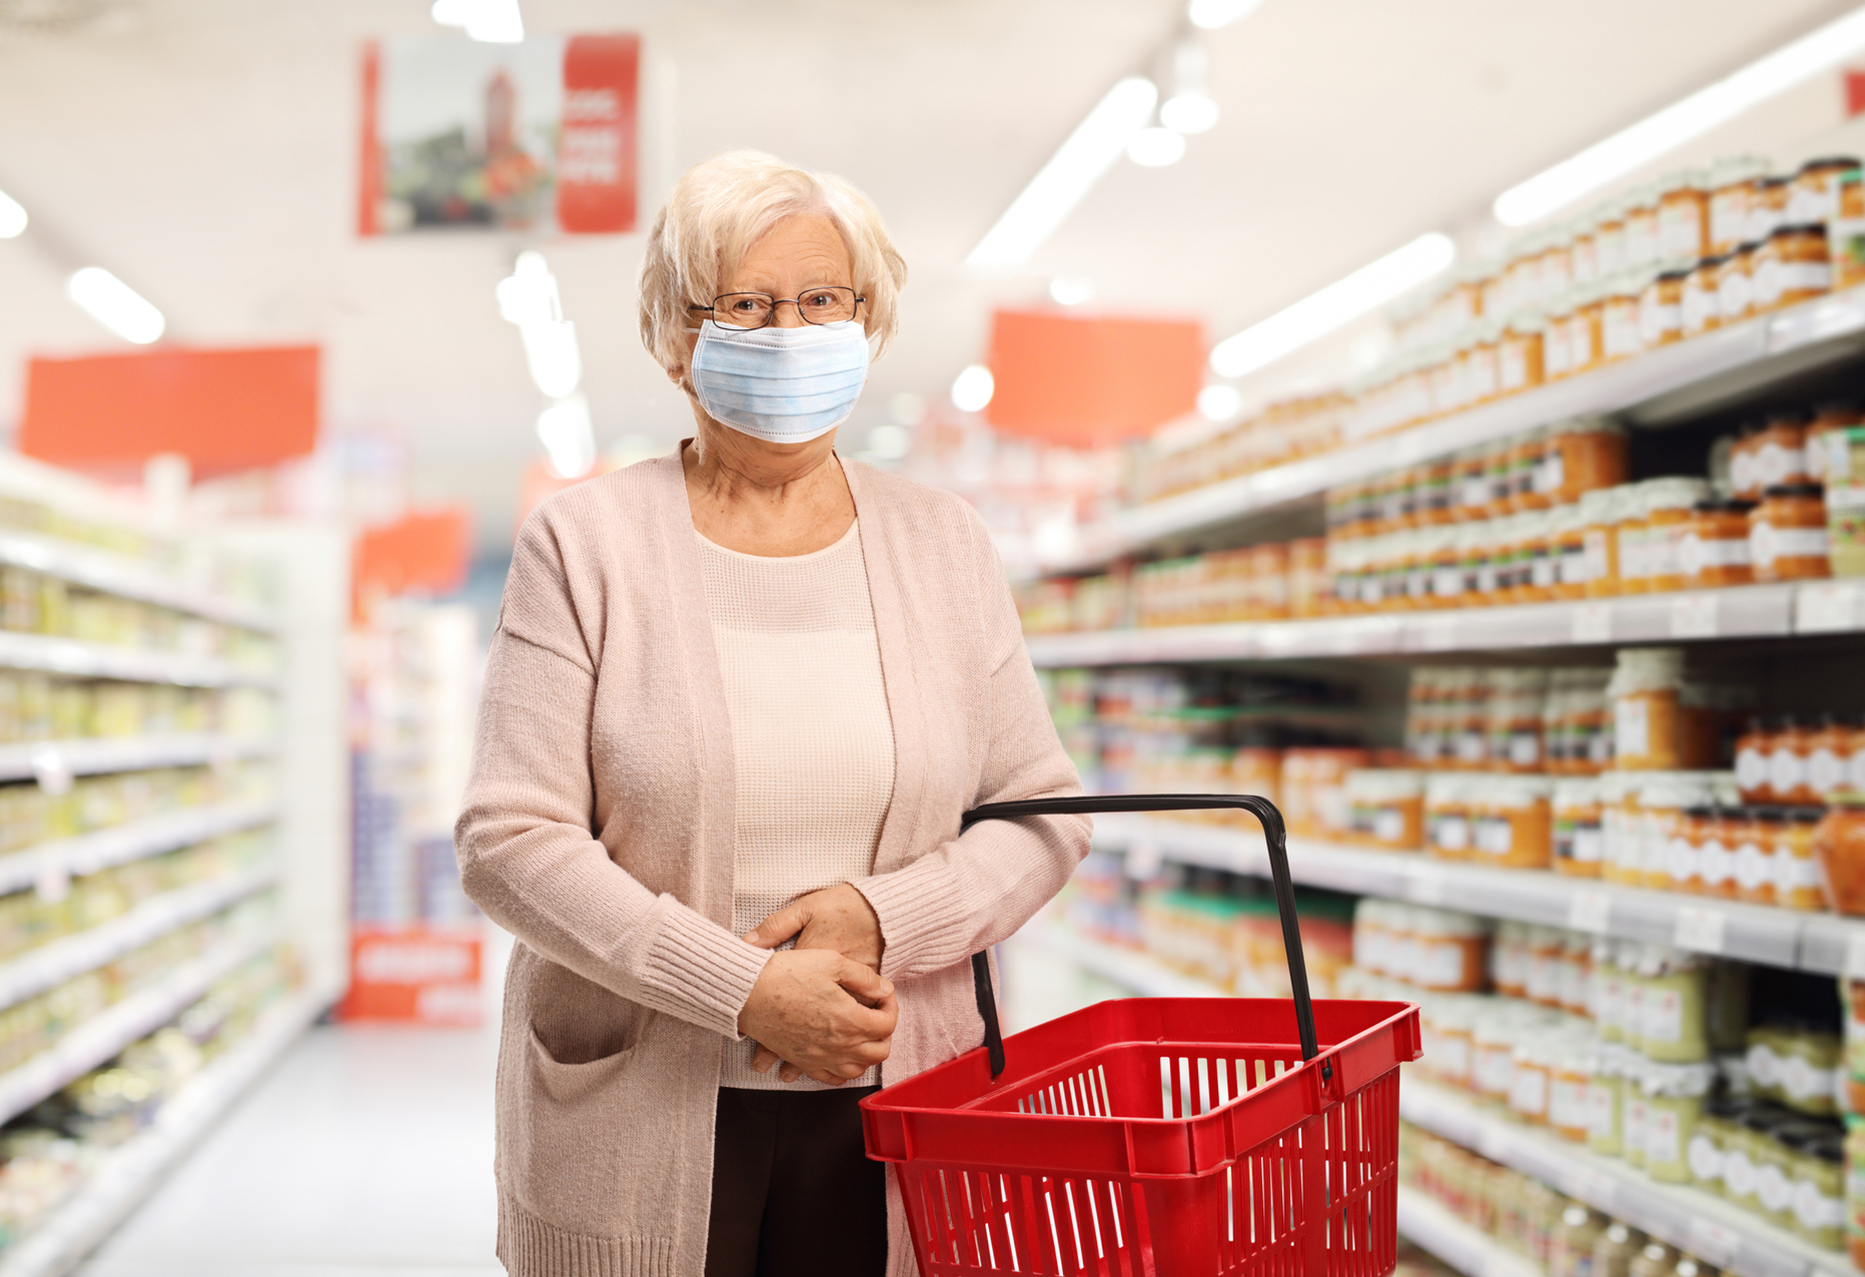 Senior citizen wearing a mask holding a shopping basket in a grocery store aisle.